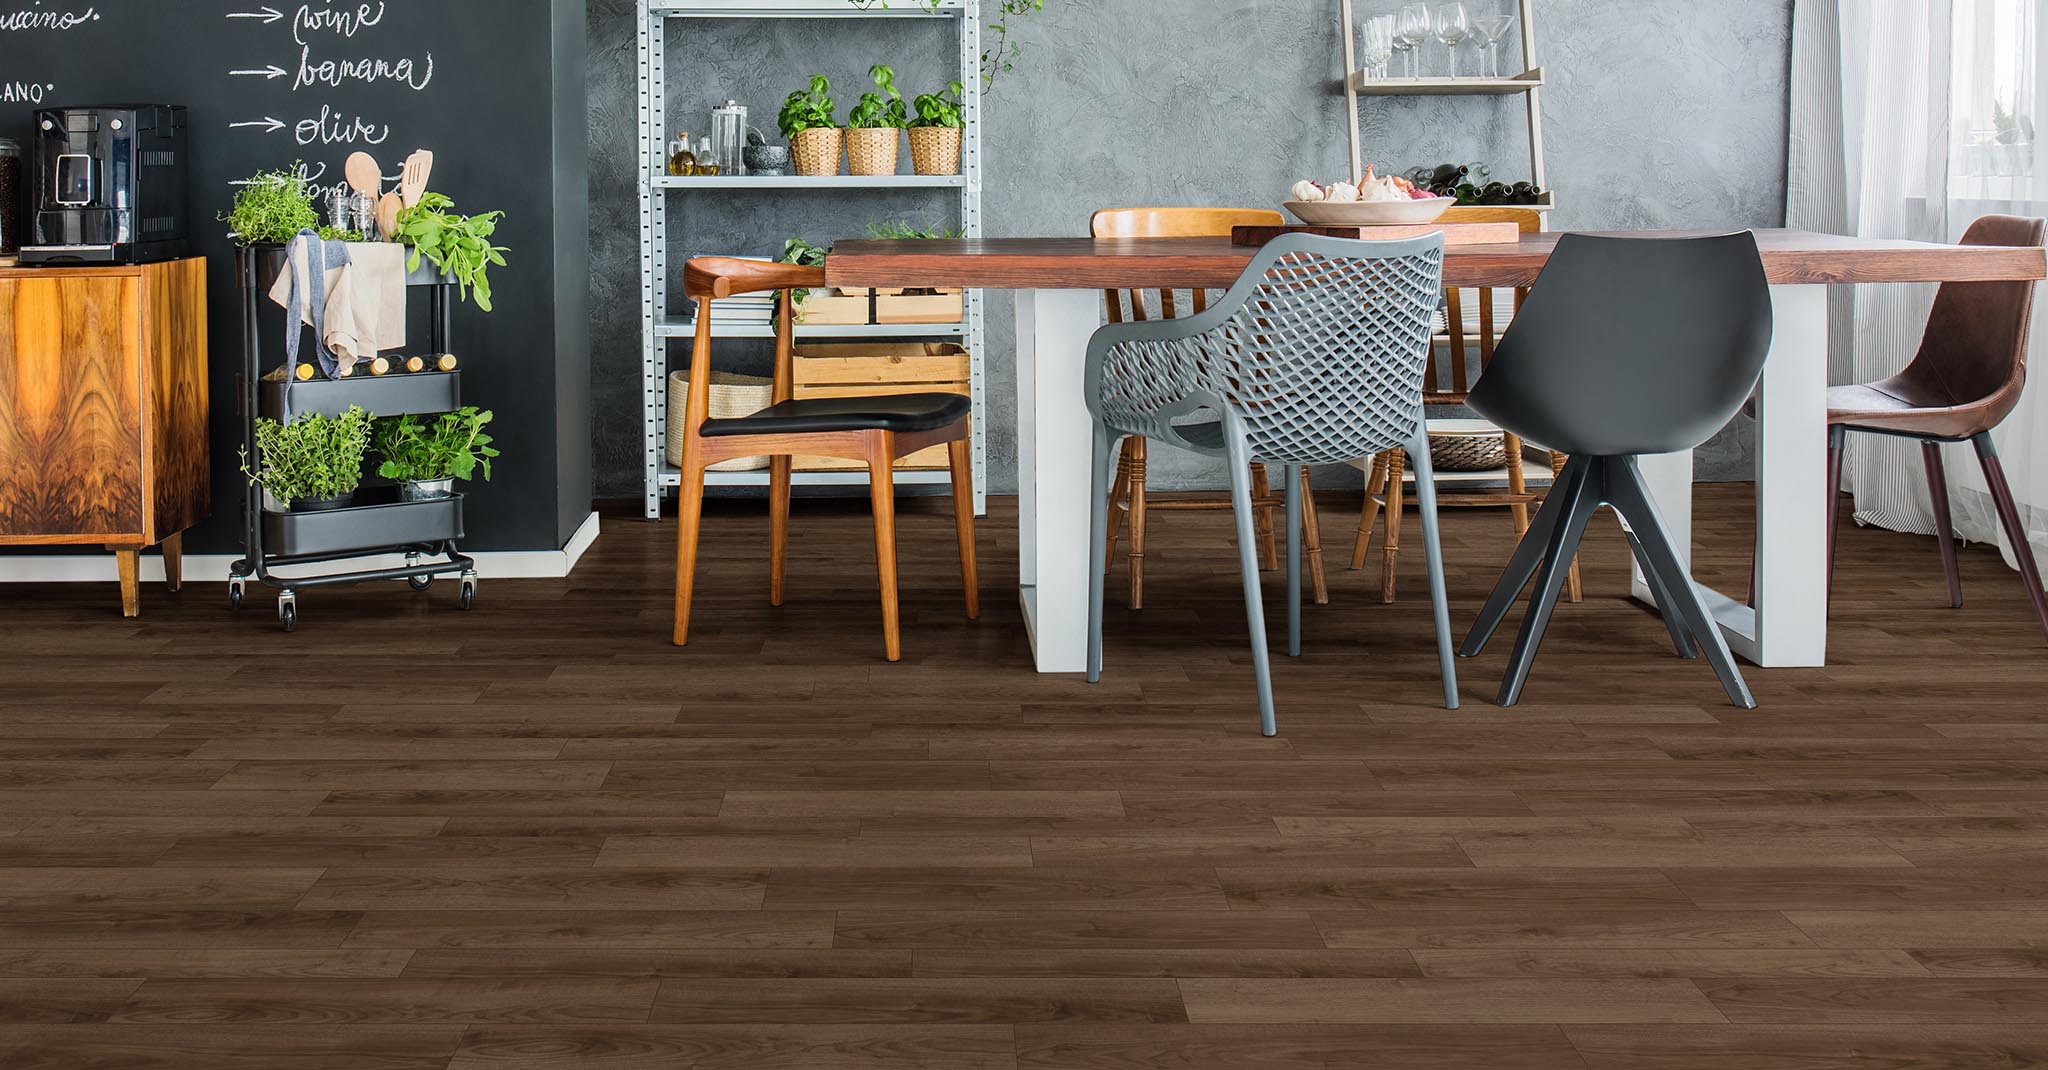 Horizen Flooring presents to you a picture of a quality wide plank Tallis luxury vinyl plank. NovoCore Q XXL Tango collection features a wide range of colors & designs that will compliment any interior. Natural wood grain synchronized surface allow for an authentic hardwood look & feel. This collection features a 0.3″ / 7.5 mm overall thickness and a durable 22 mil / 0.55 mm wear layer for residential and commercial applications.